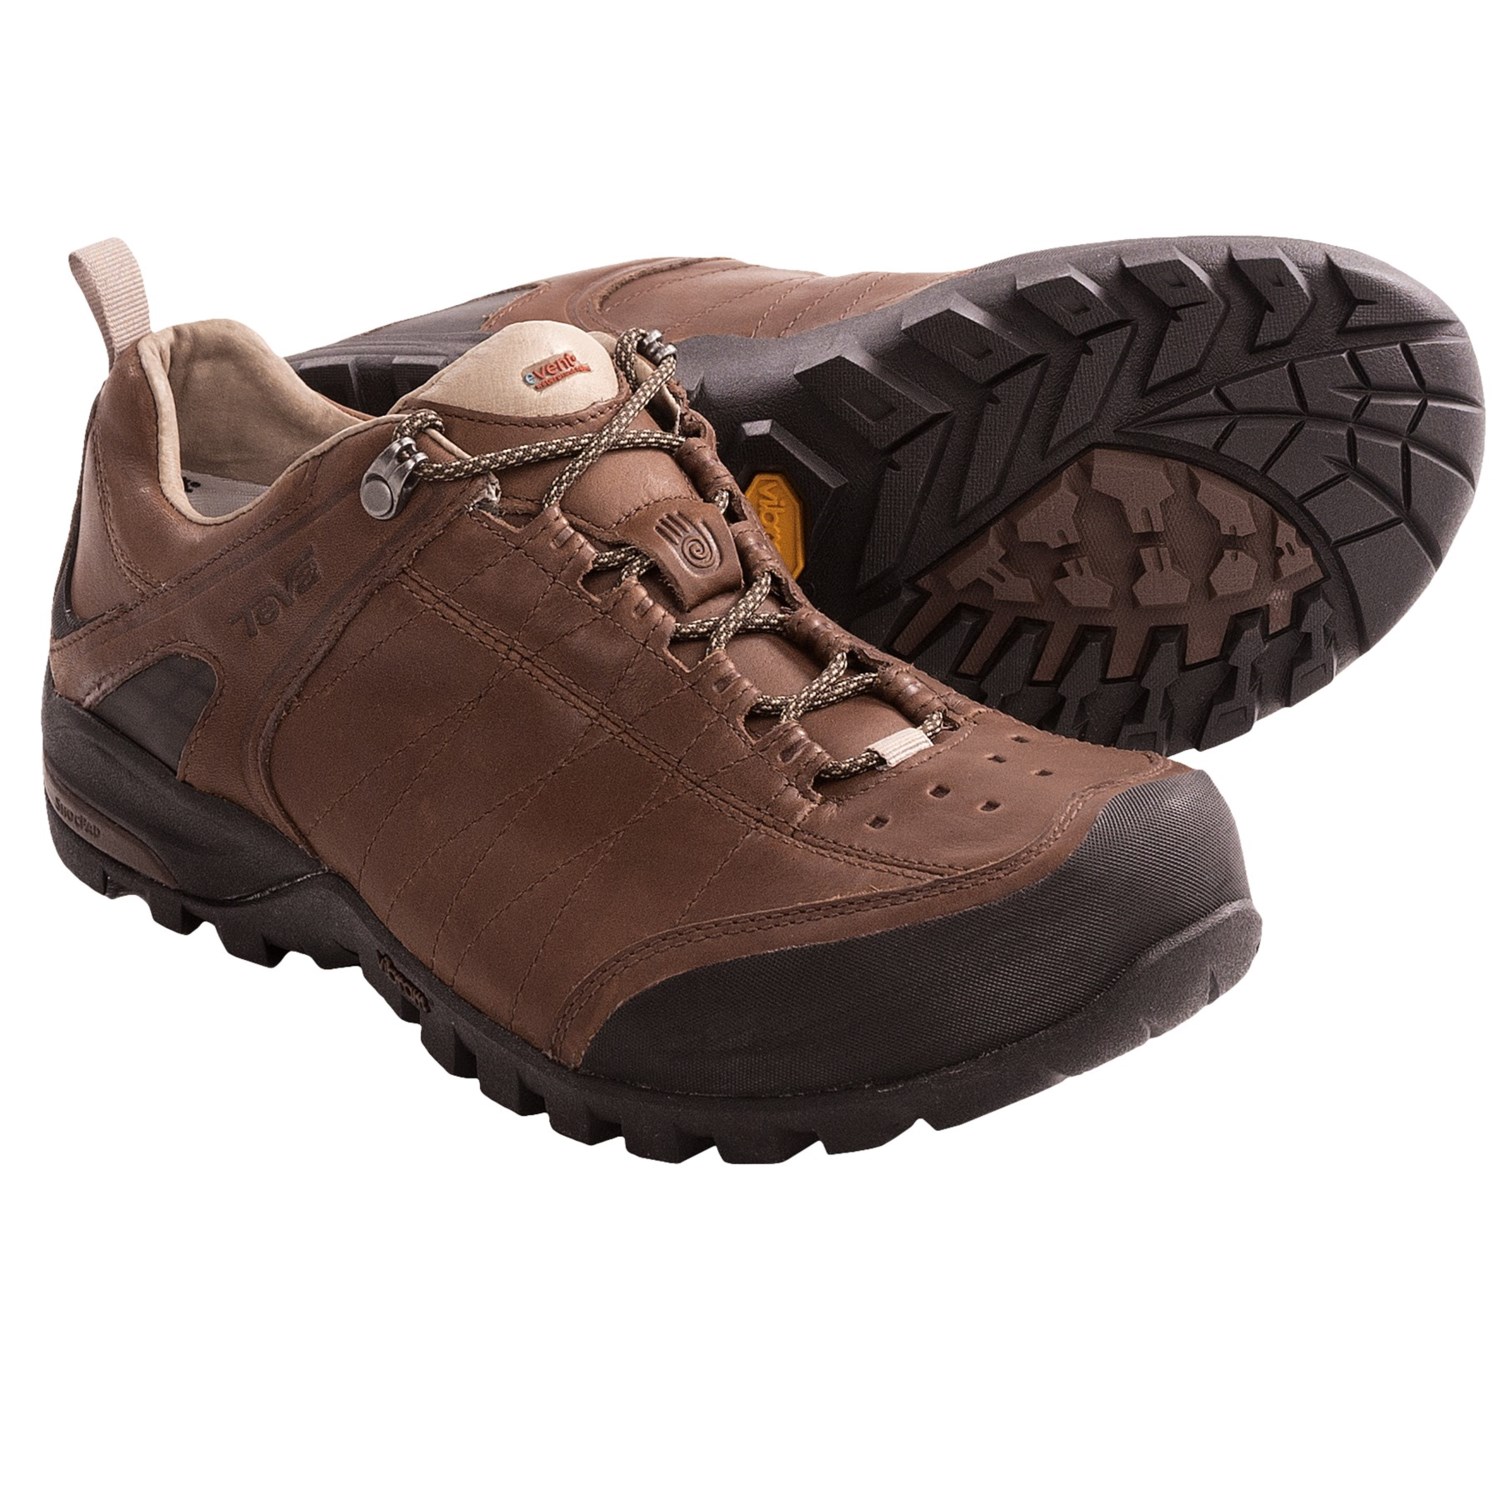 Teva Riva eVentÂ® Trail Shoes - Waterproof, Leather (For Men) - Save ...